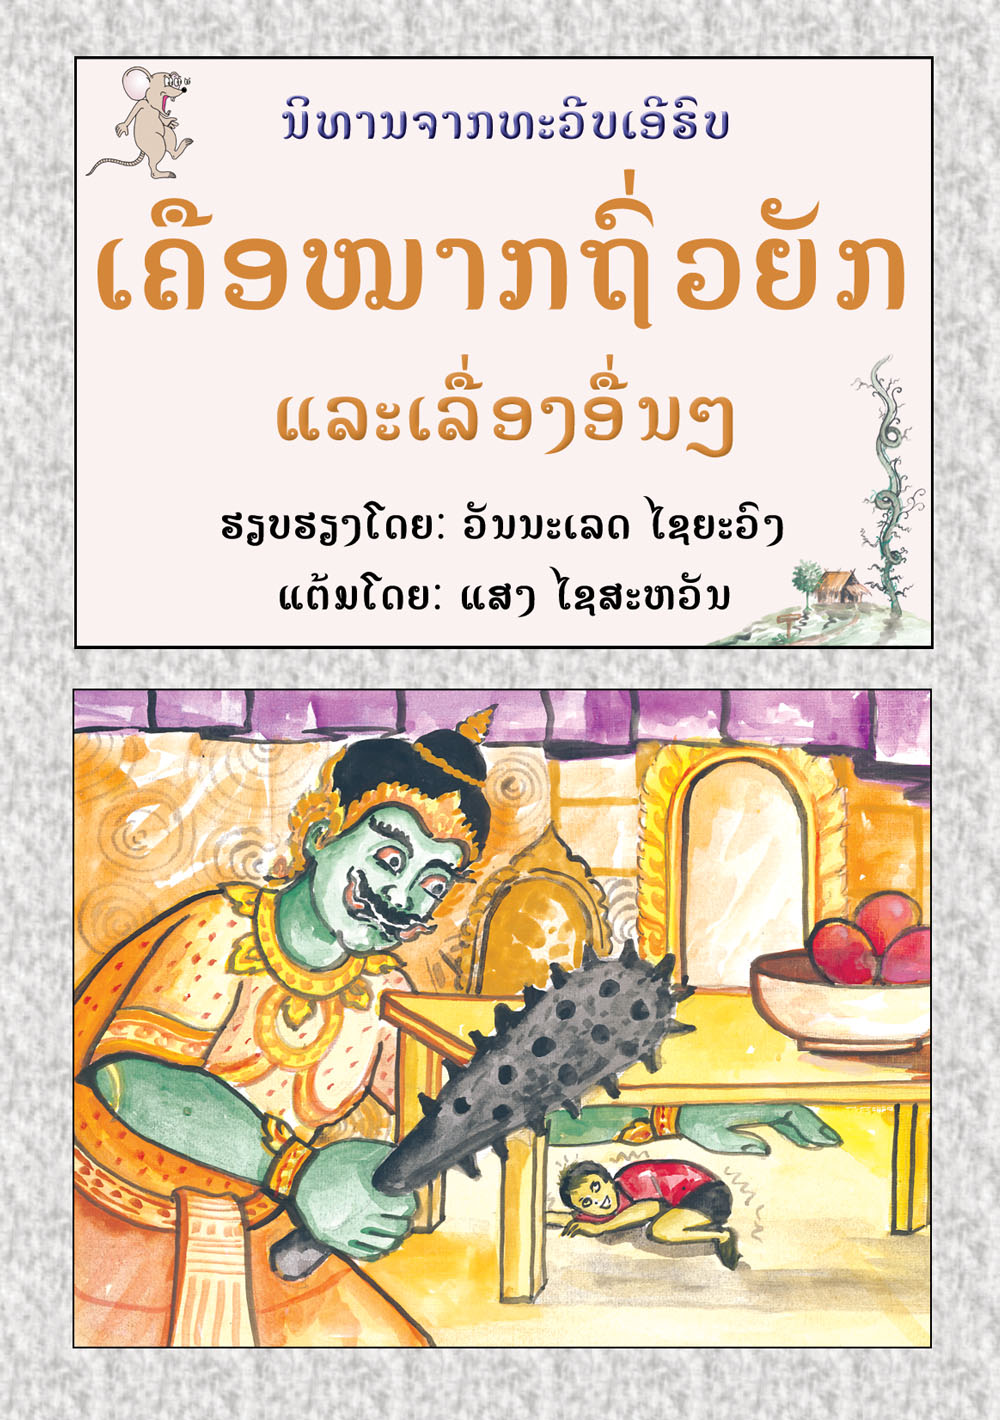 Jack and the Beanstalk large book cover, published in Lao language